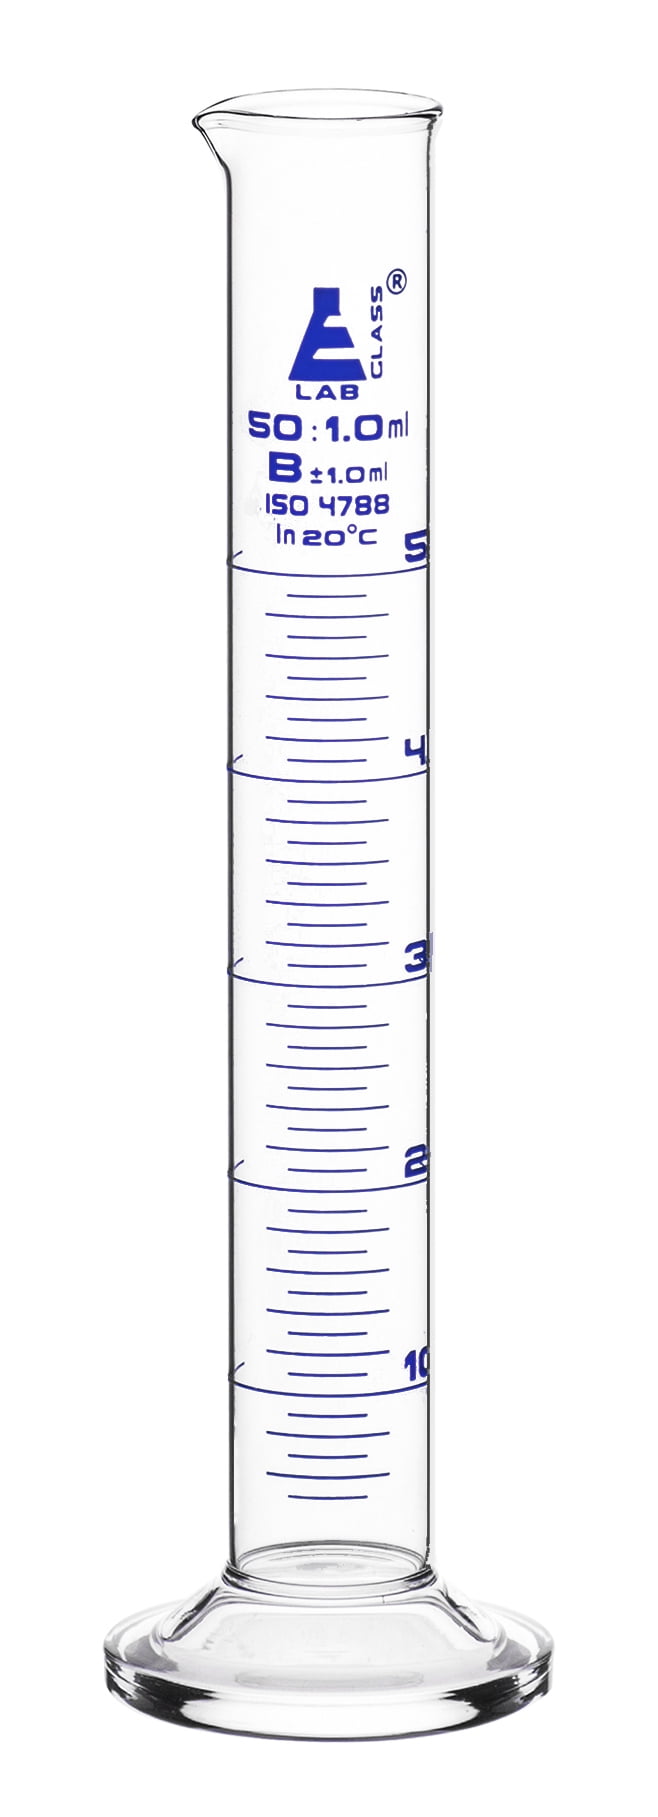 Baluue Glass Graduated Cylinders 50ml Measuring Cup Science Measuring Test  Tube Laboratory Chemistry Experience Beakers for Liquid Dry Transparent